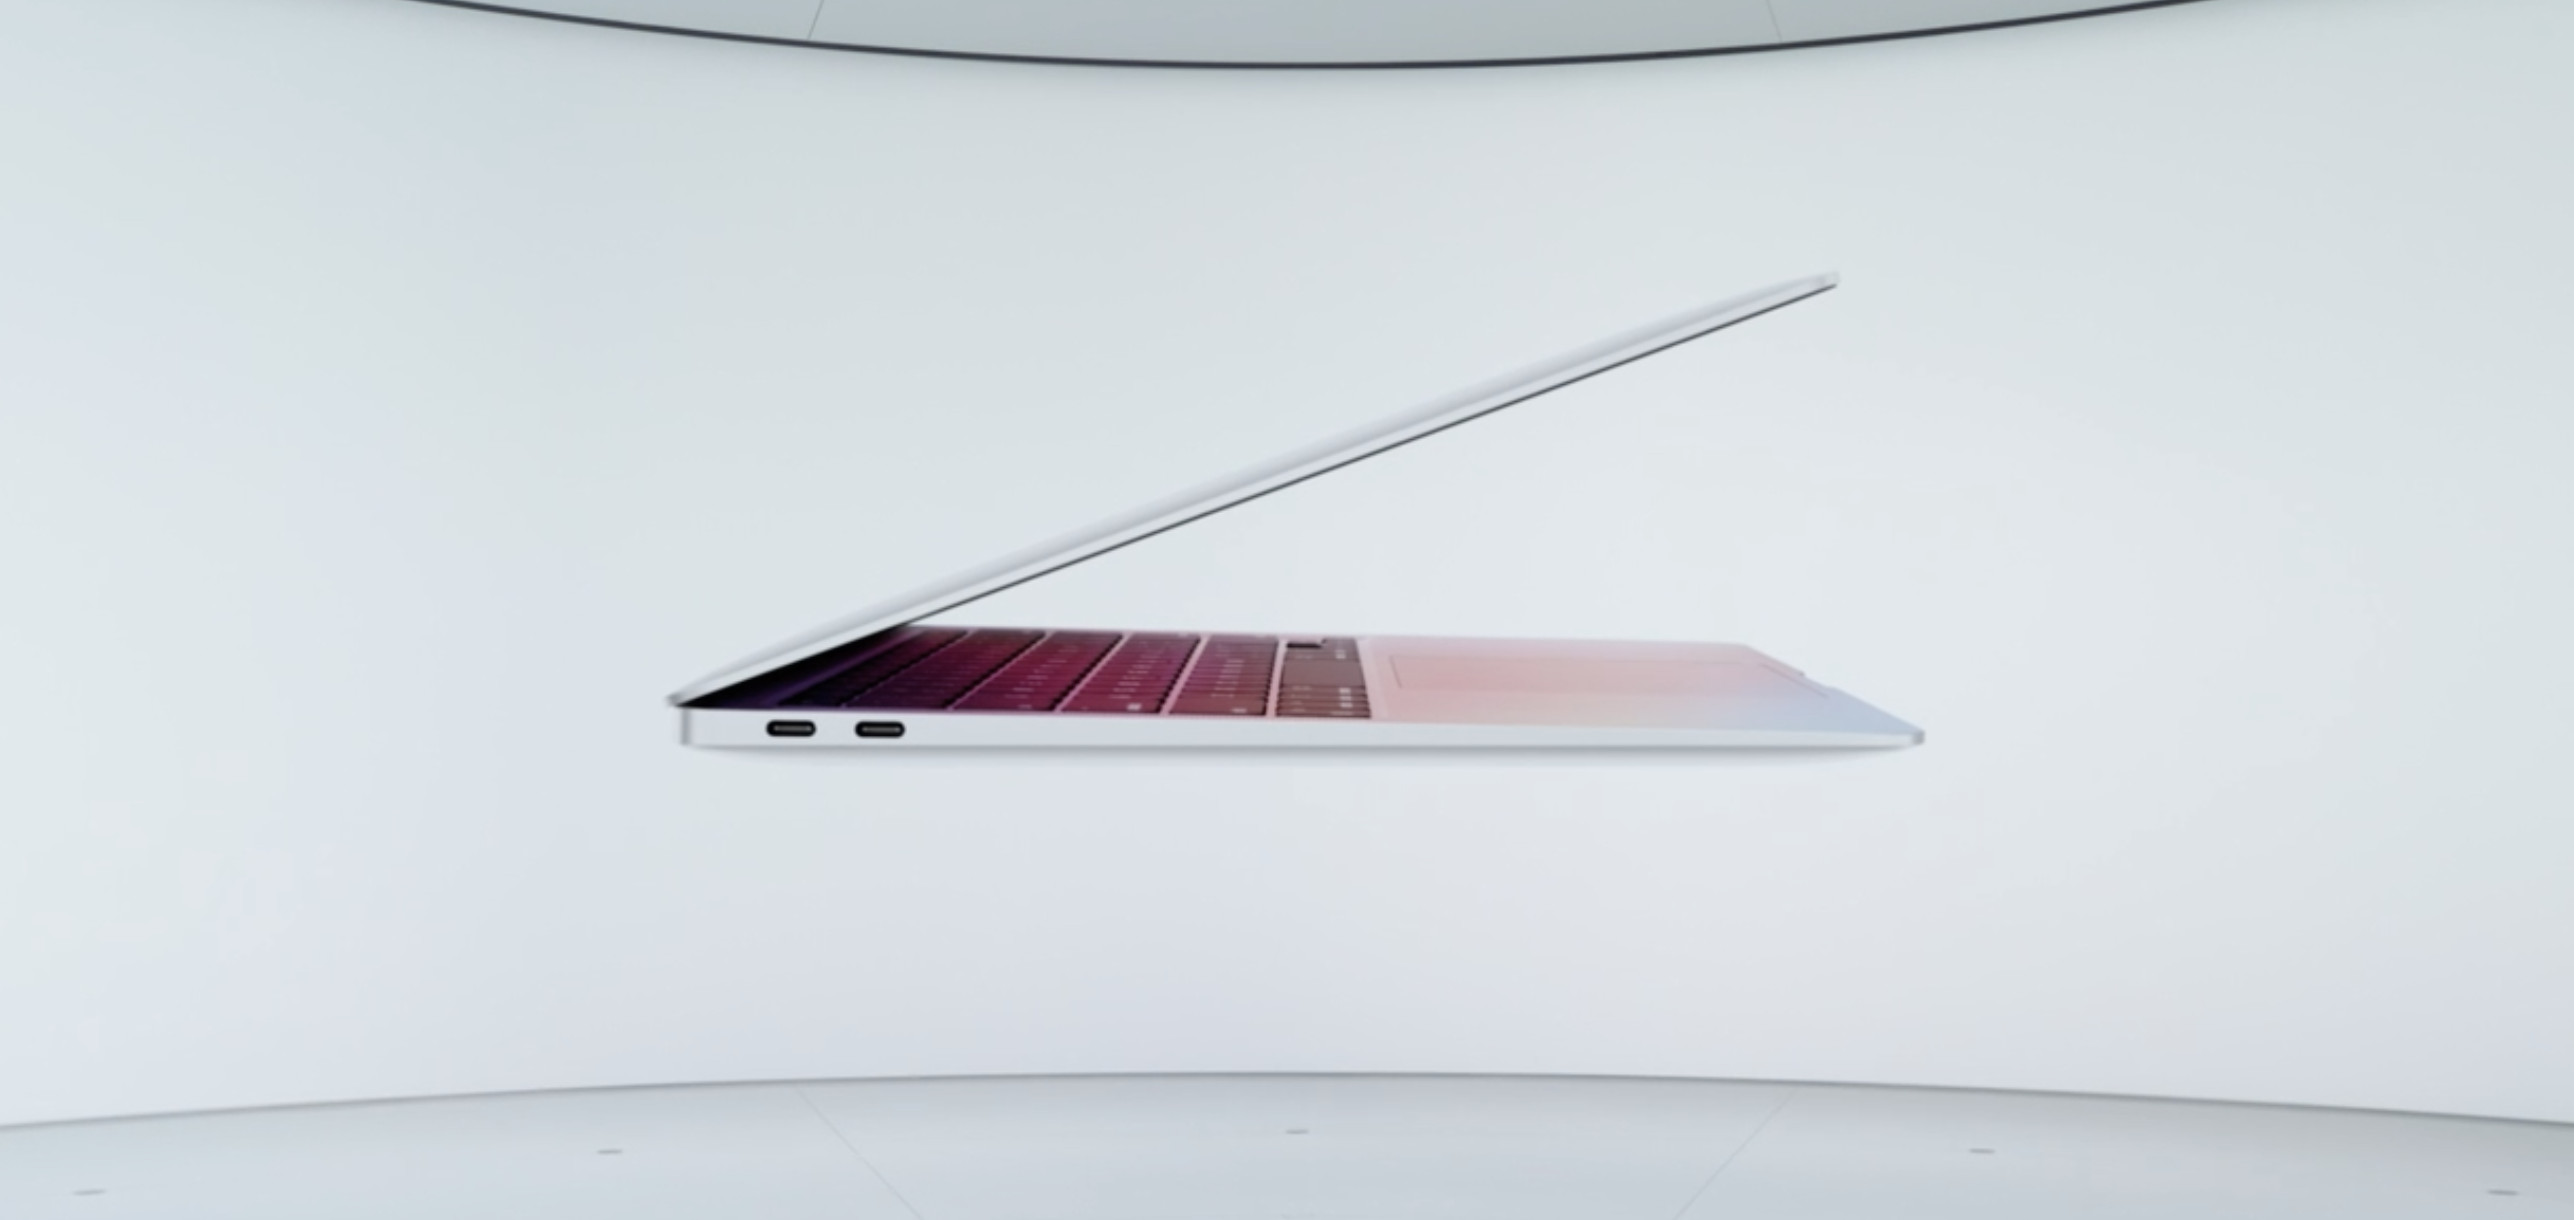 MacBook Air 2020 M1 Price, Release Date, and Specs